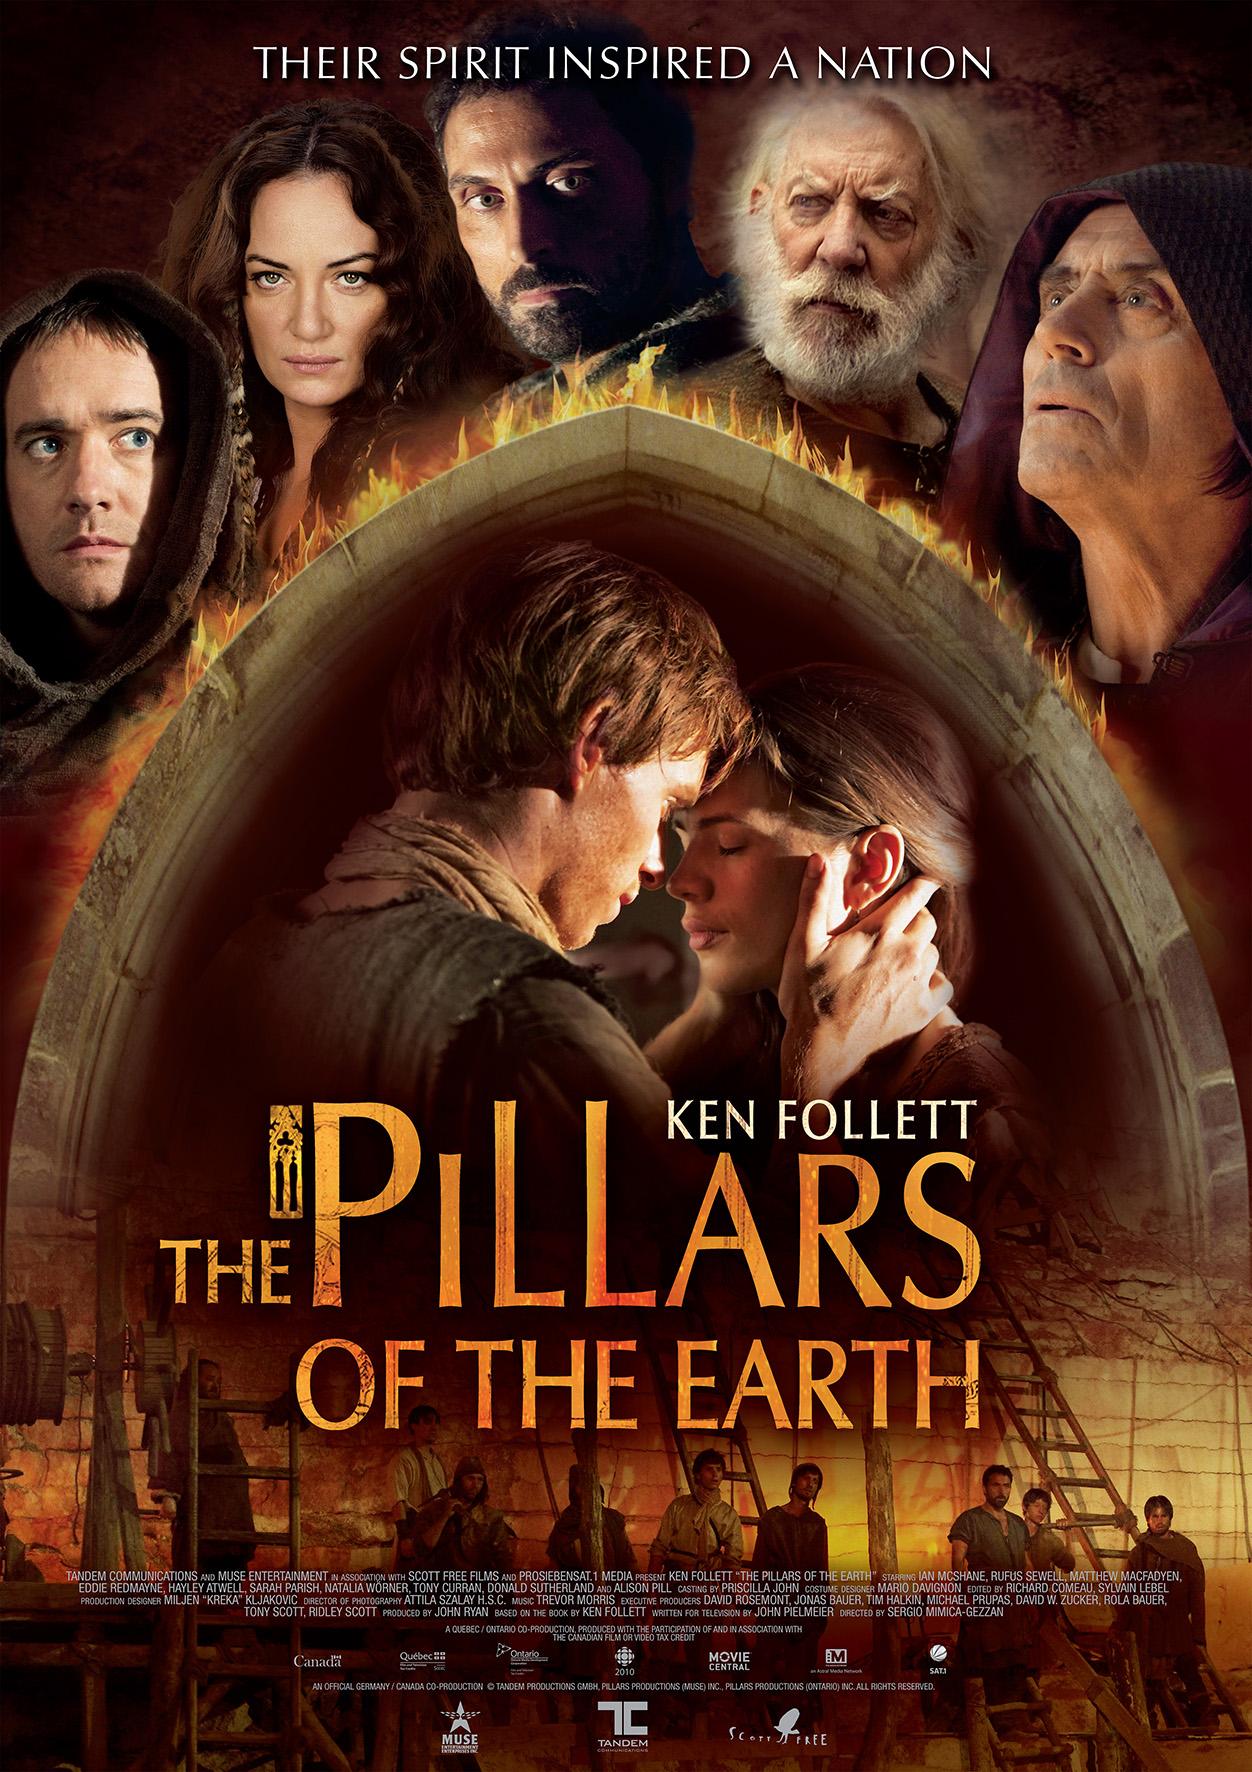 the-pillars-of-the-earth-2010-studiocanal-uk-europe-s-largest